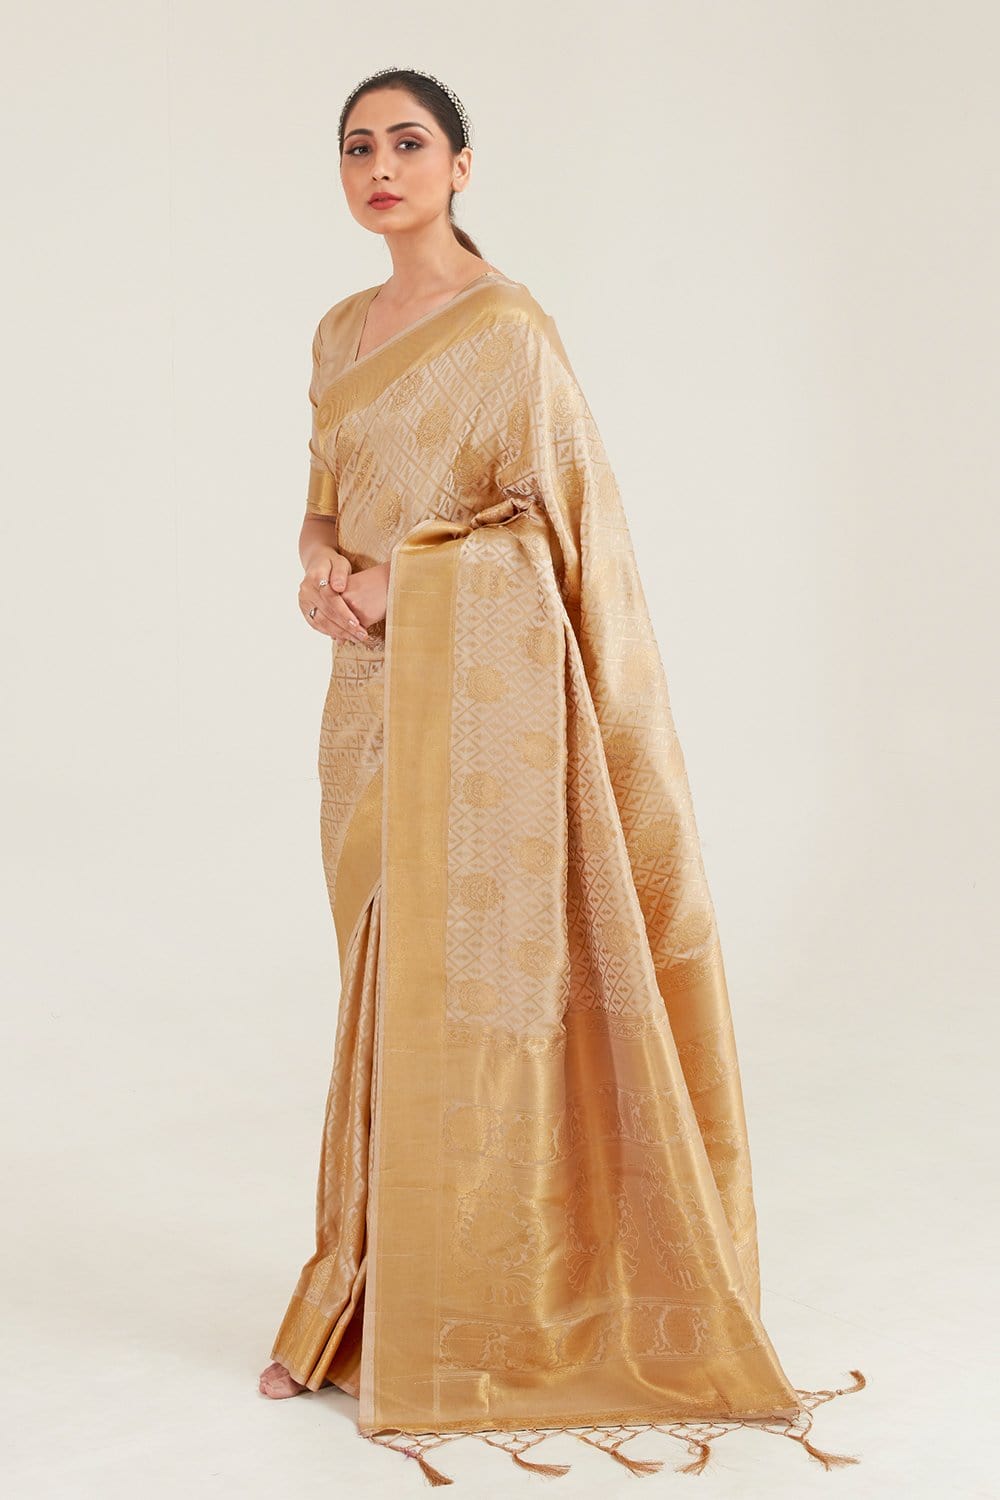 Buy Beige Gold Saree Only by I AM DESIGN at Ogaan Online Shopping Site